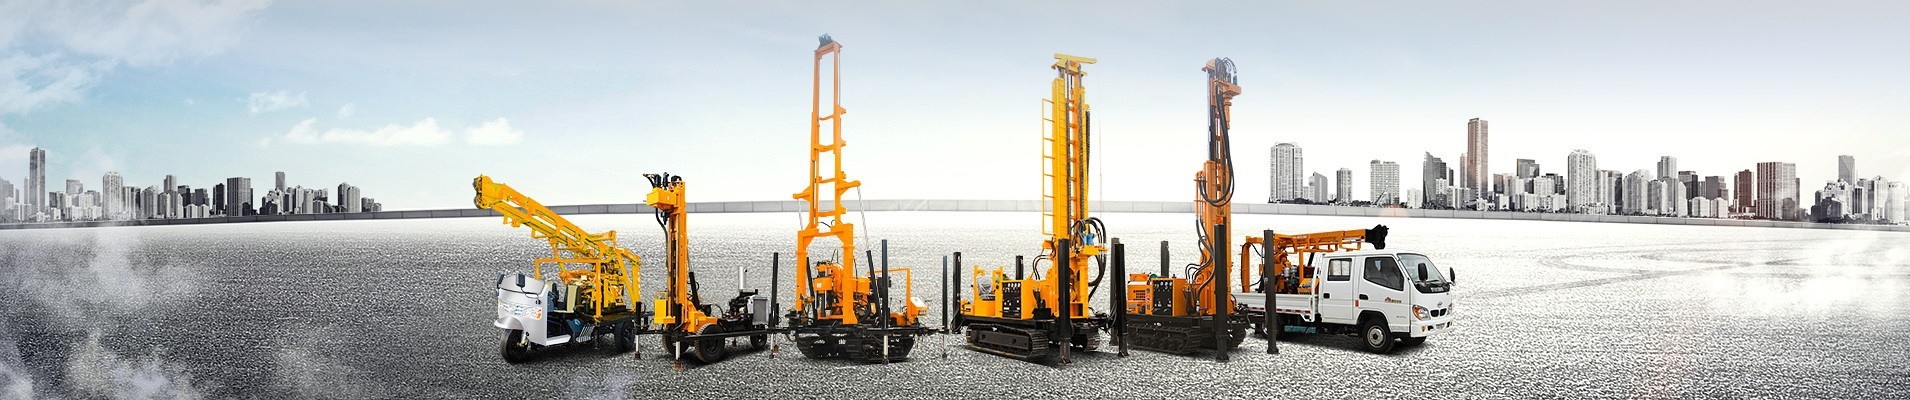 DTH Drilling Rig